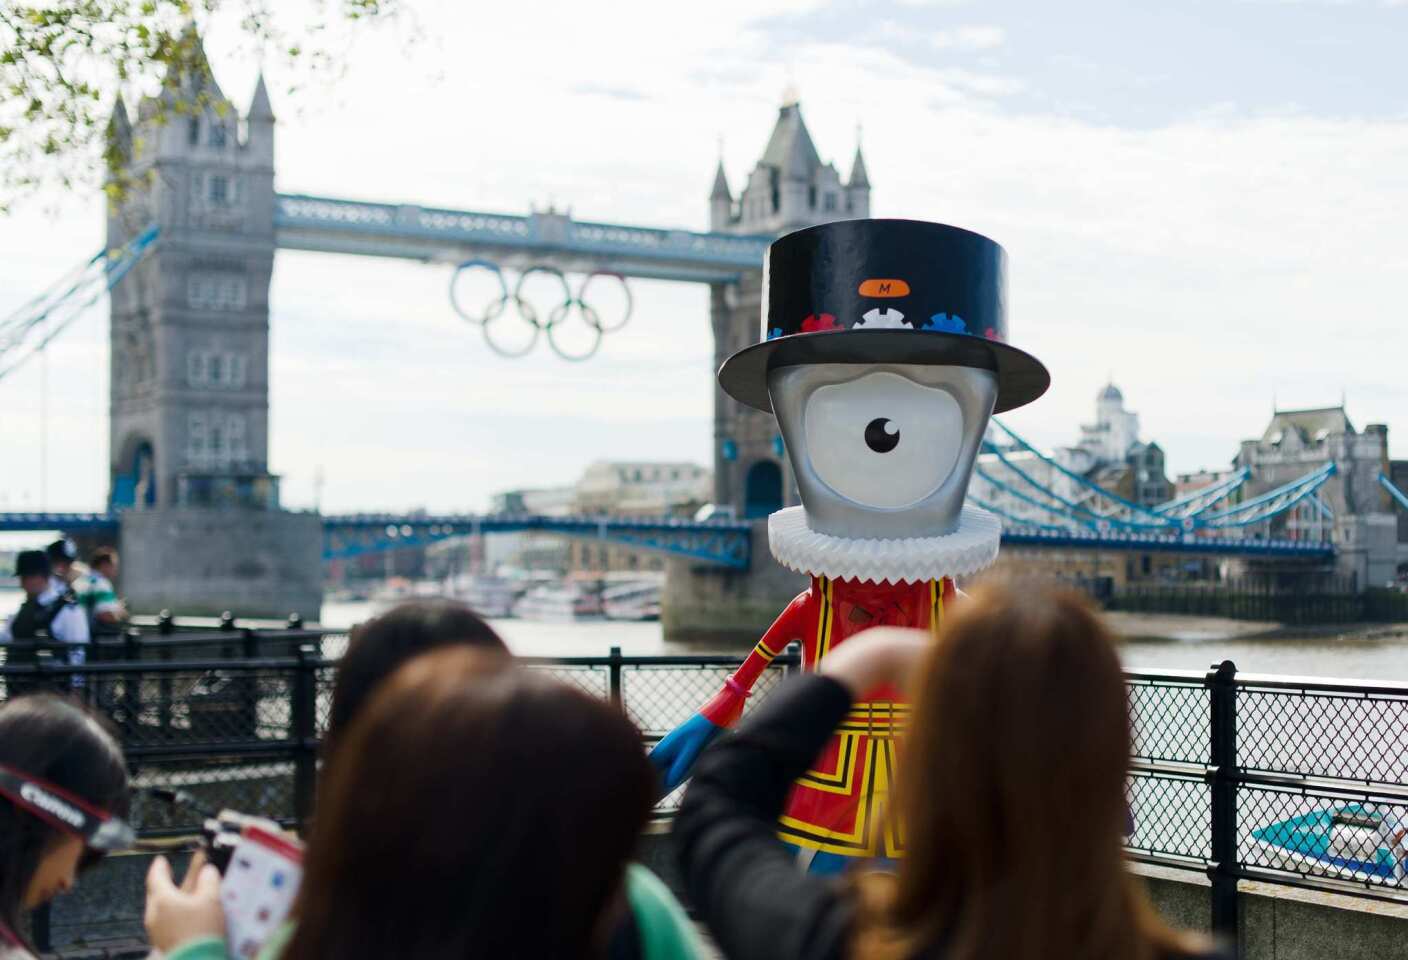 Beefeater Mandeville near the Tower of London